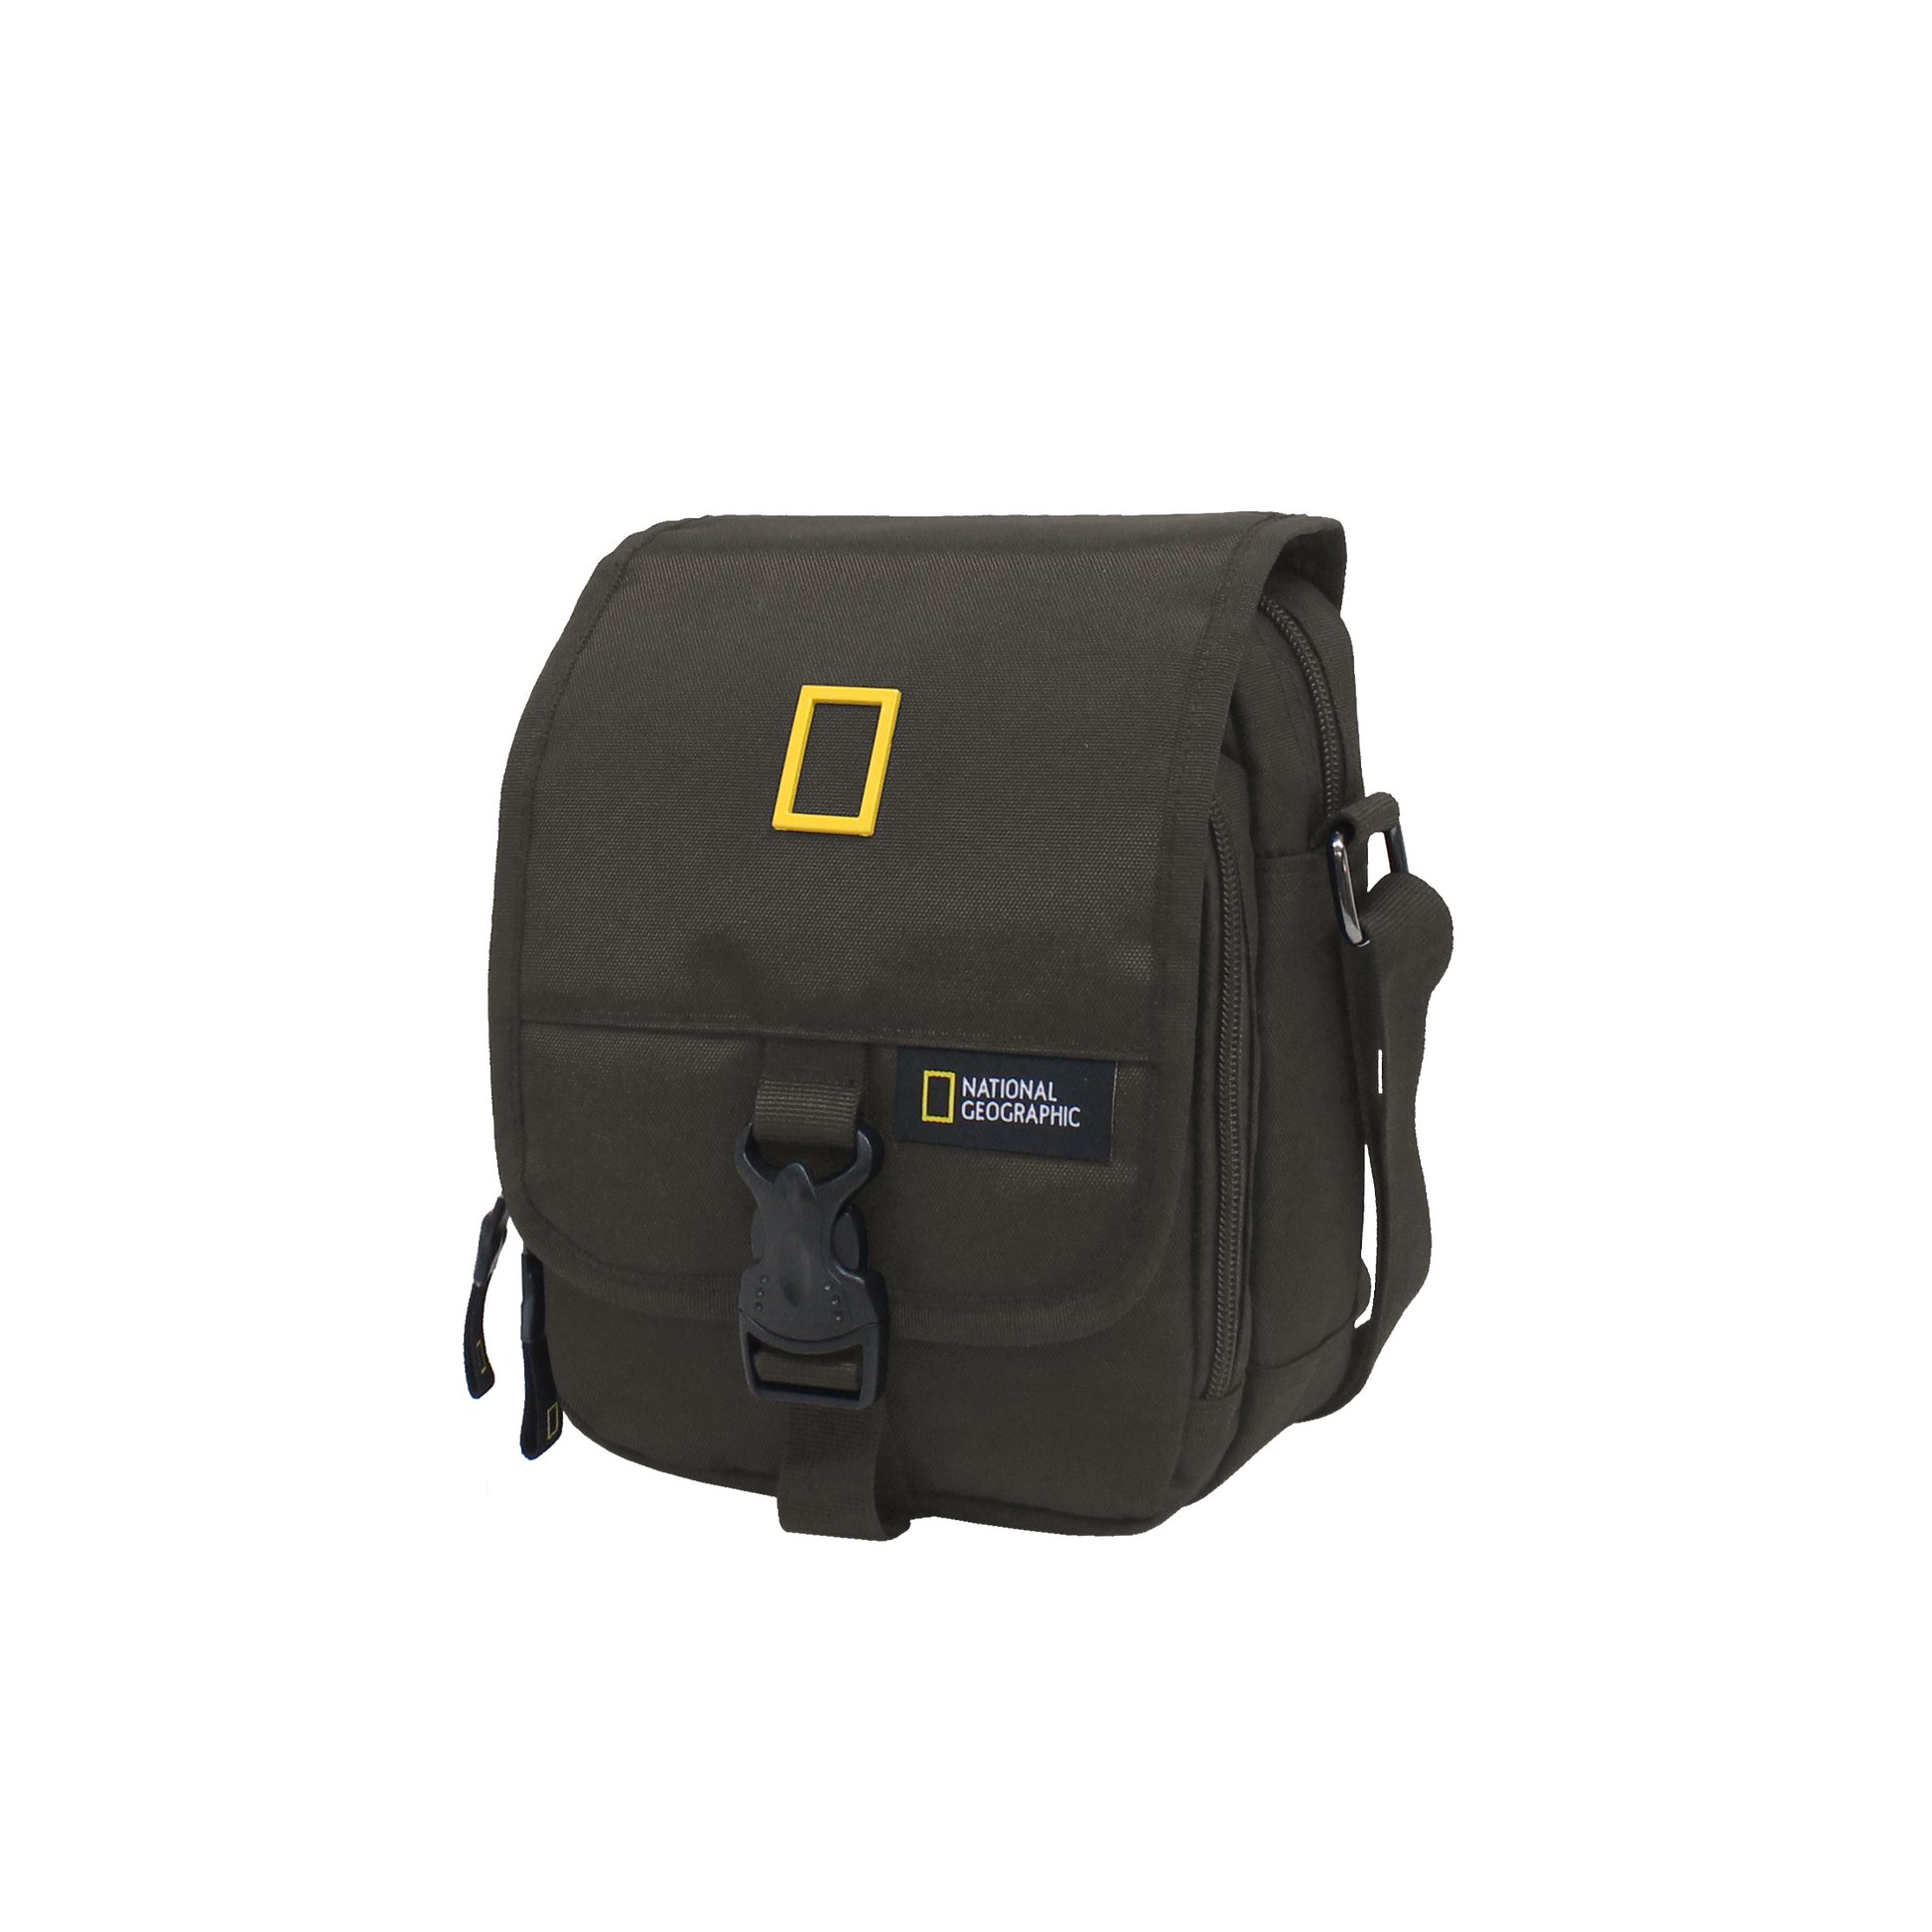 National Geographic Recovery Utility - Voorkant Khaki schoudertas | luggage4u.be